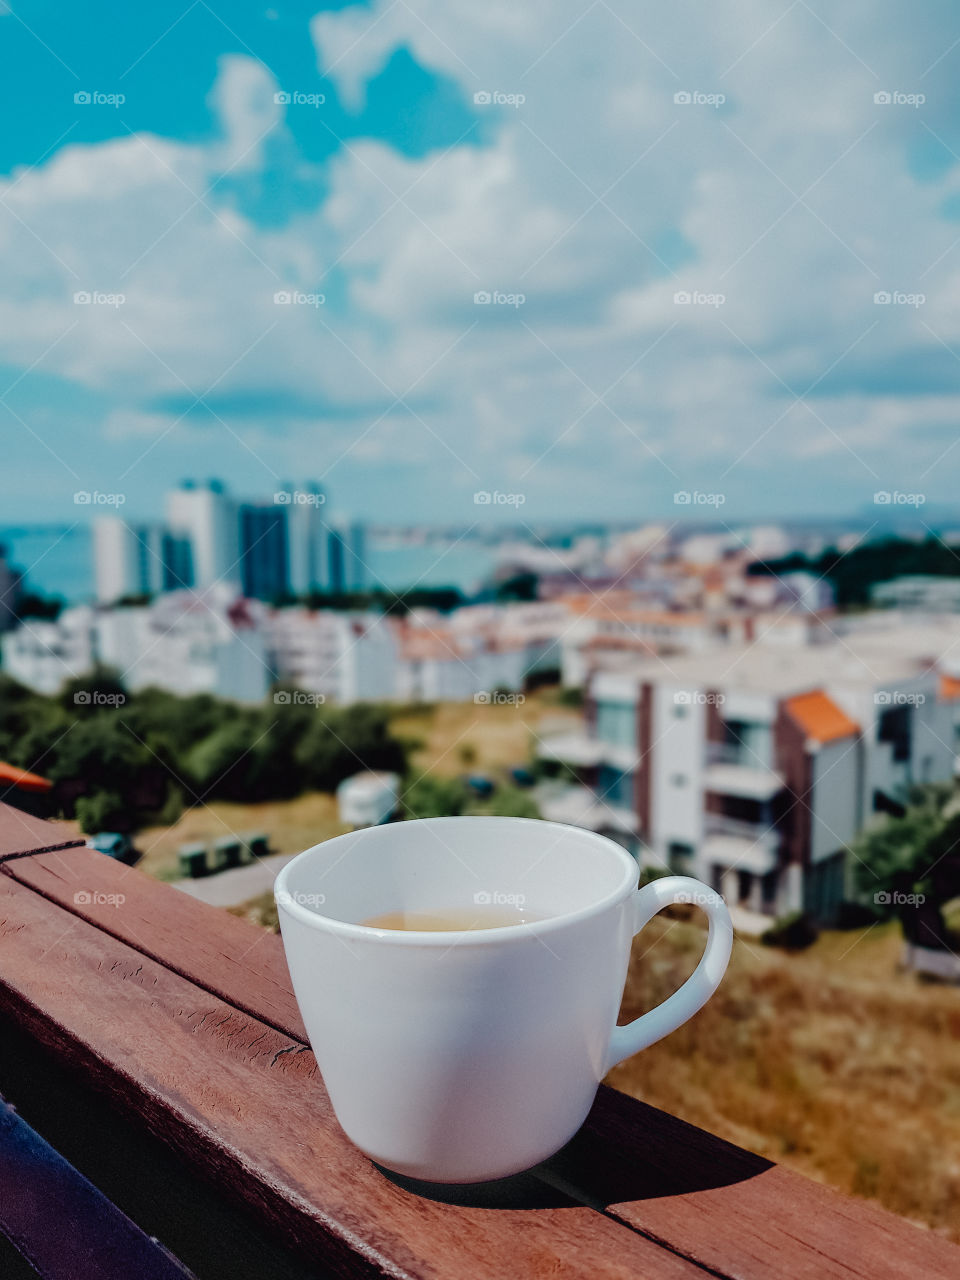 Cup on balcony with ctityscape view.